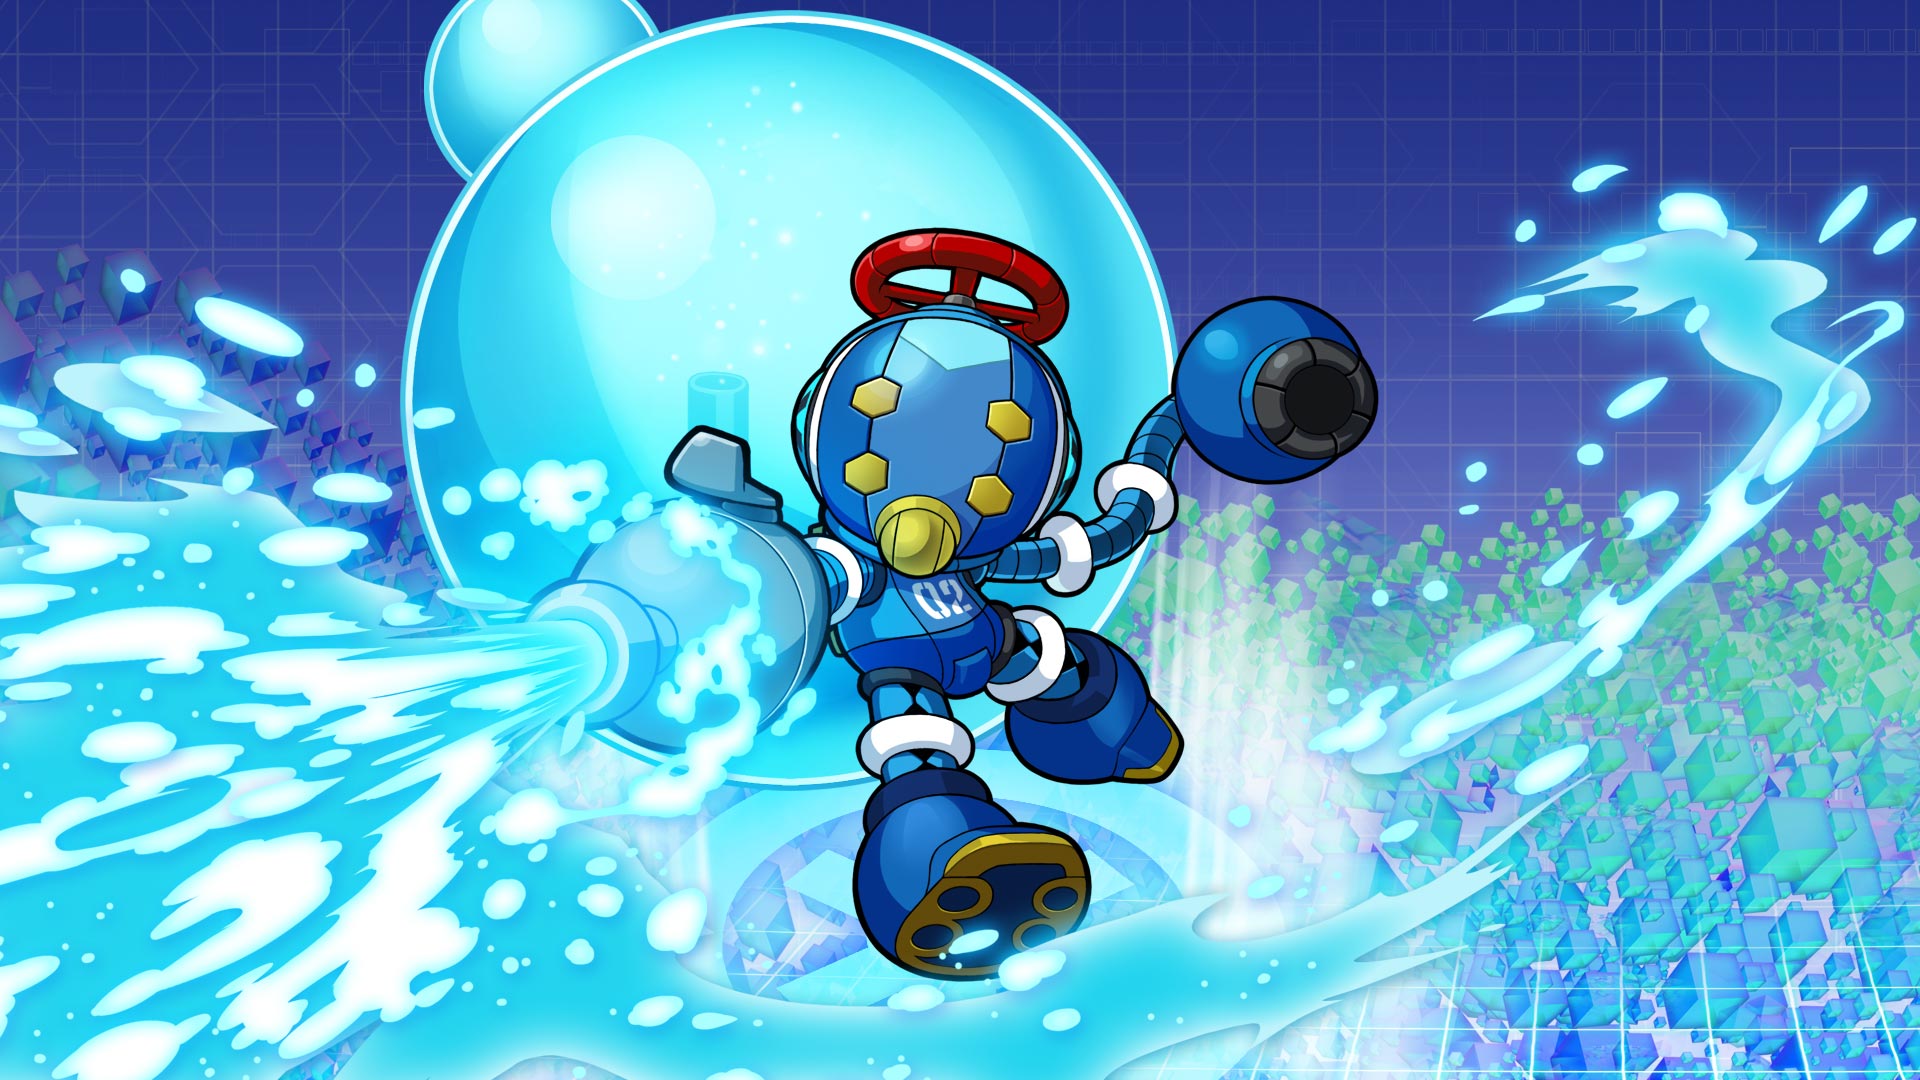 mighty no 9 steam download free